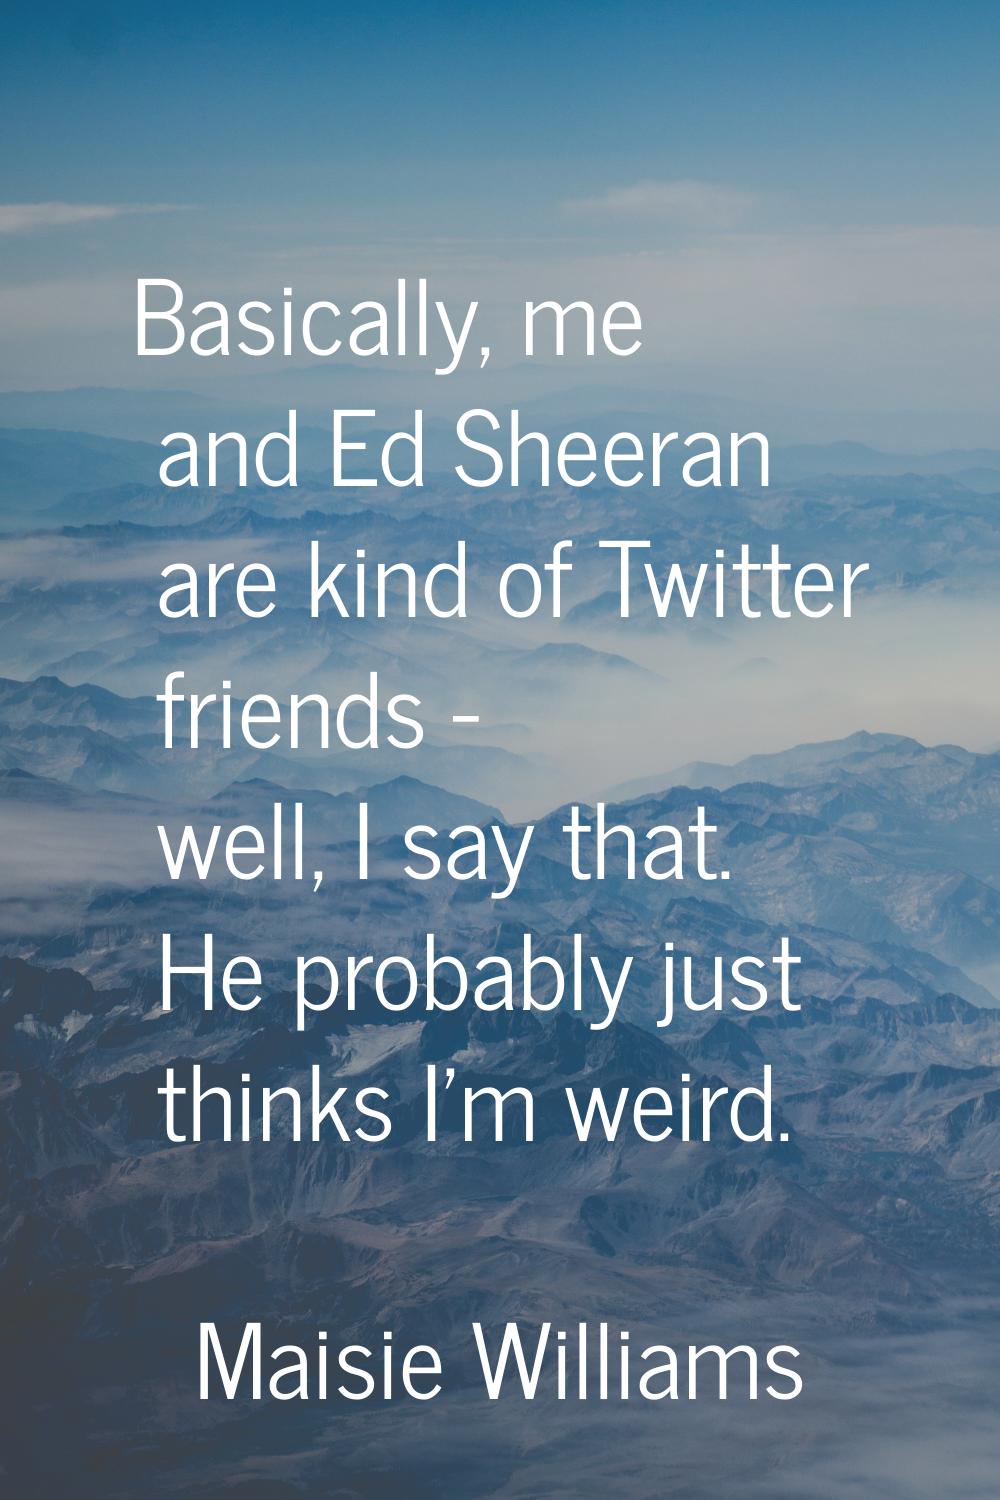 Basically, me and Ed Sheeran are kind of Twitter friends - well, I say that. He probably just think